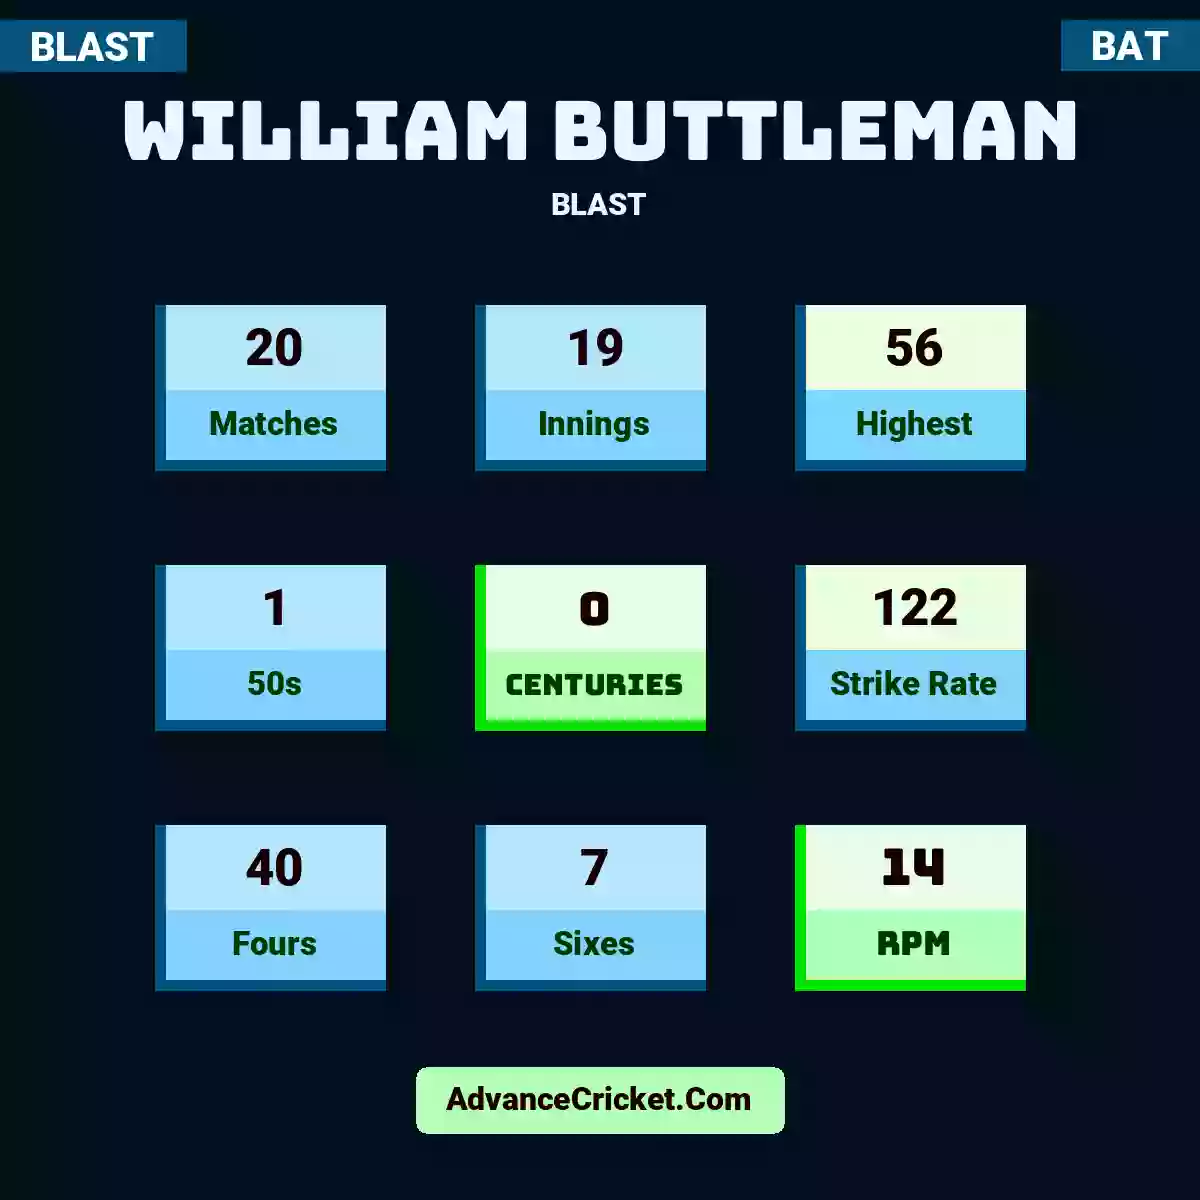 William Buttleman BLAST , William Buttleman played 20 matches, scored 56 runs as highest, 1 half-centuries, and 0 centuries, with a strike rate of 122. W.Buttleman hit 40 fours and 7 sixes, with an RPM of 14.